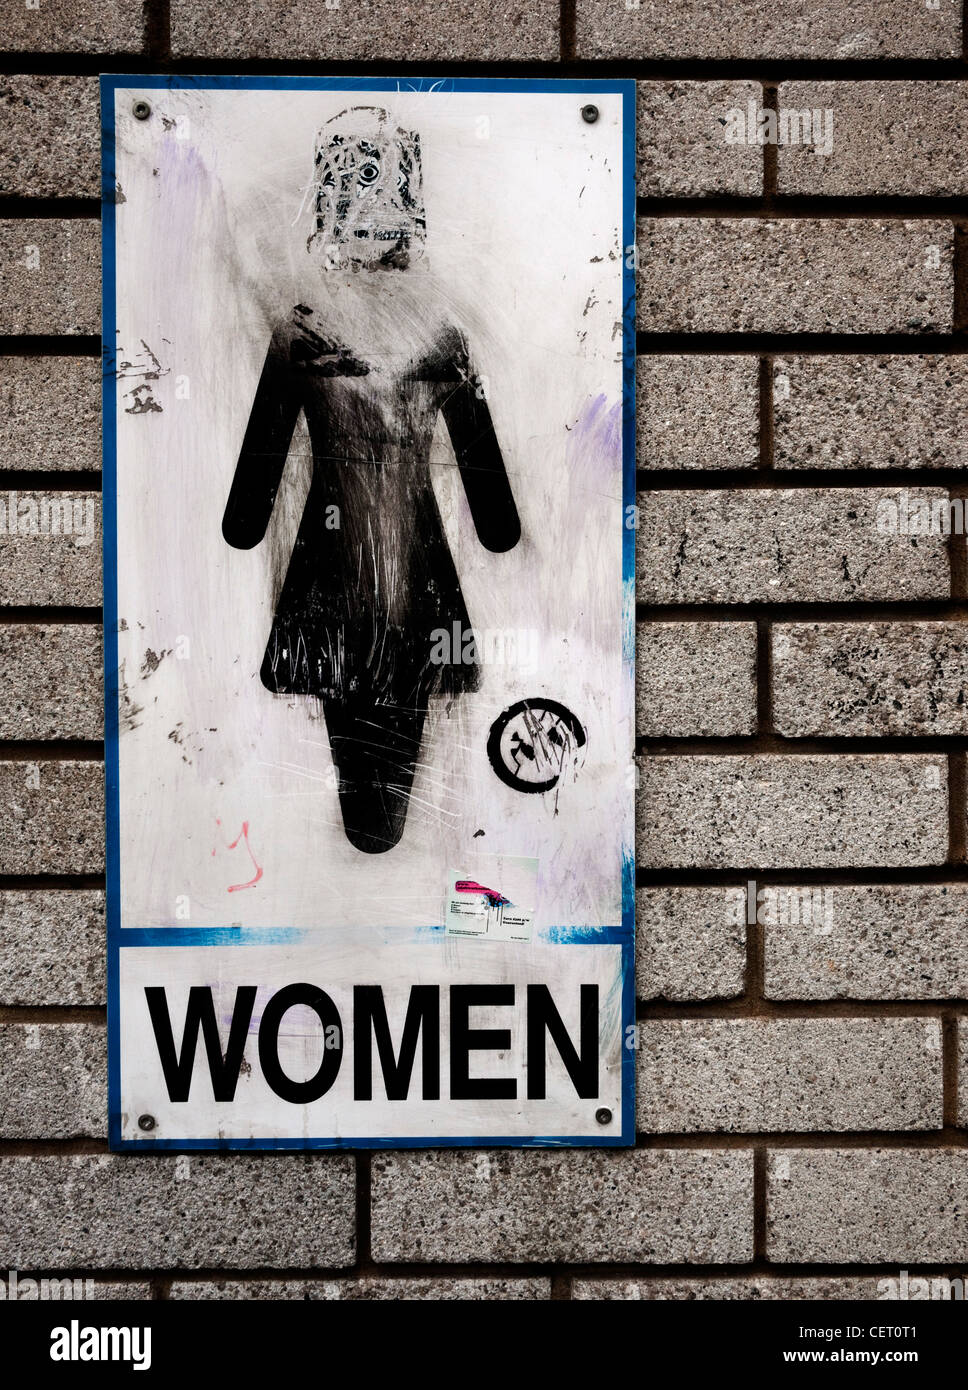 Womans public toilet sign in Bristol graffitied Stock Photo